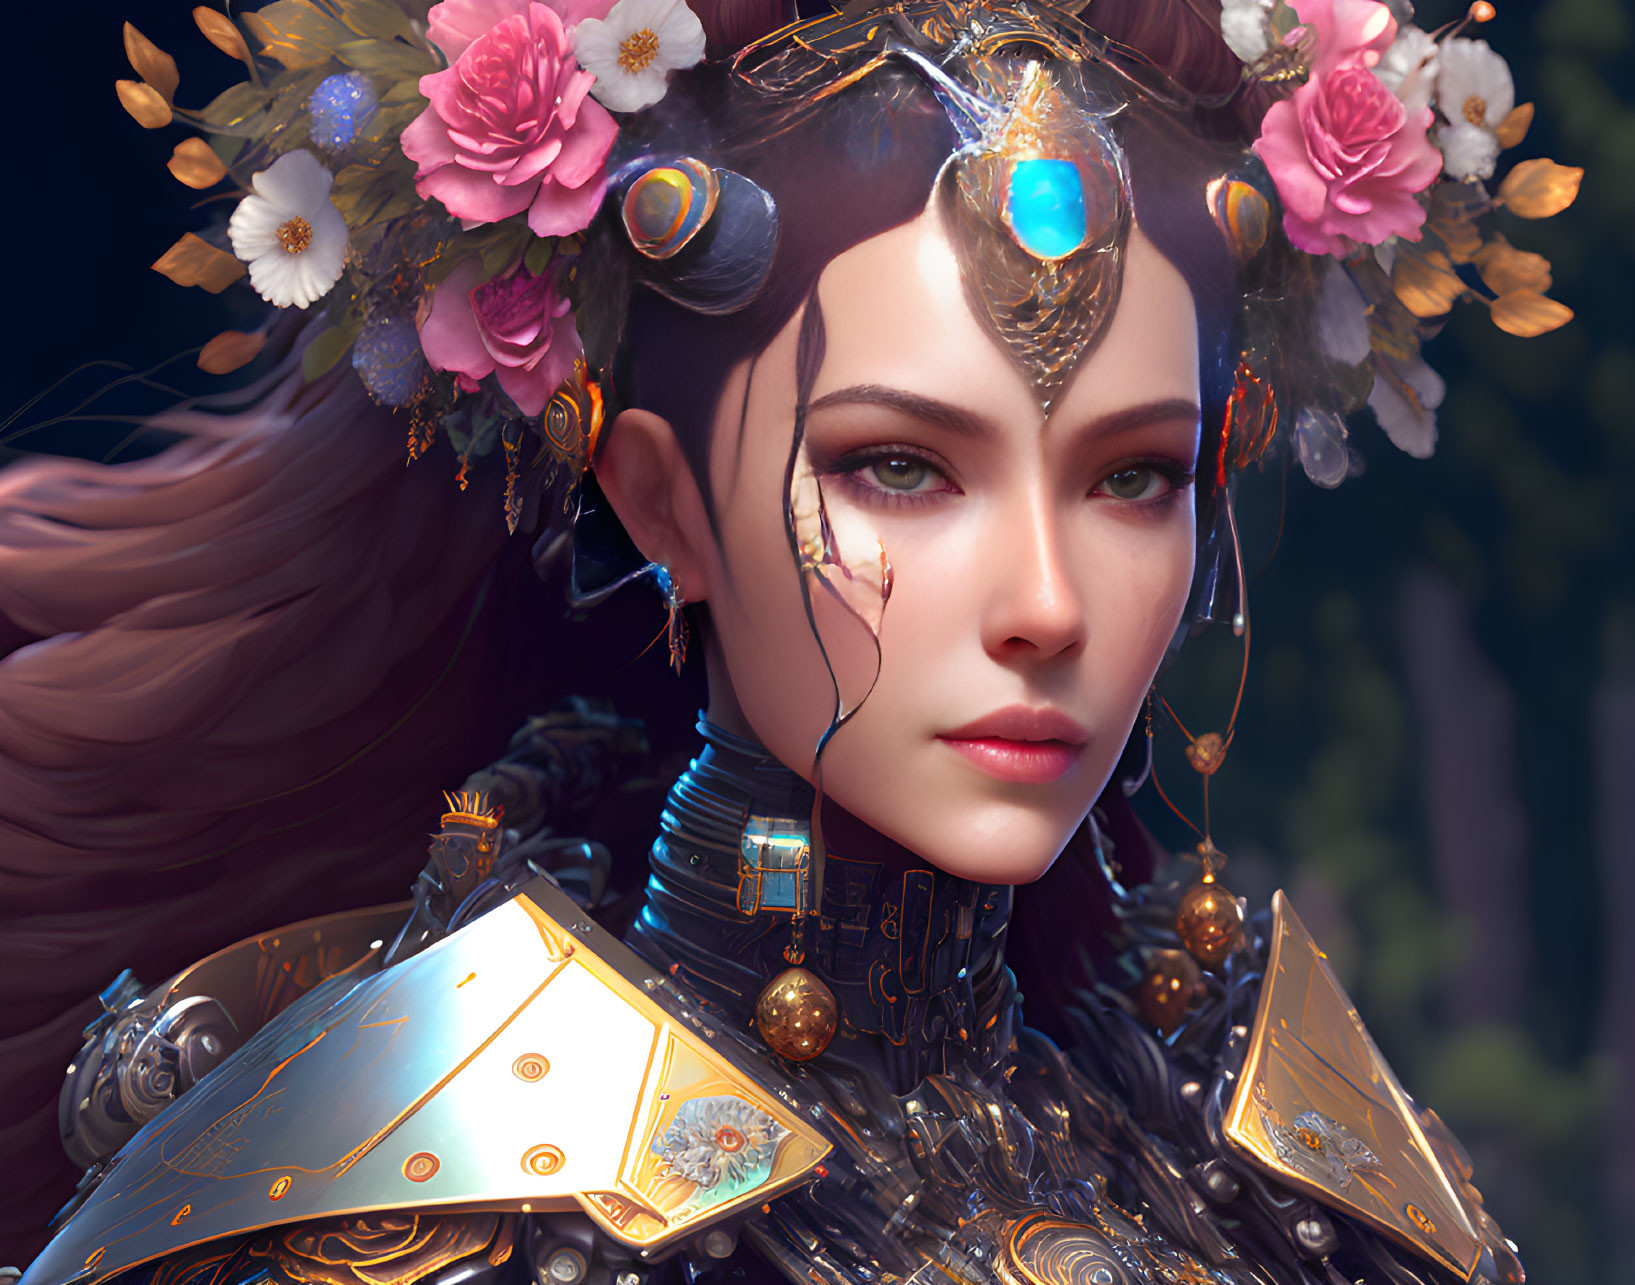 Digital artwork featuring woman in ornate armor with gold accents and gemstones